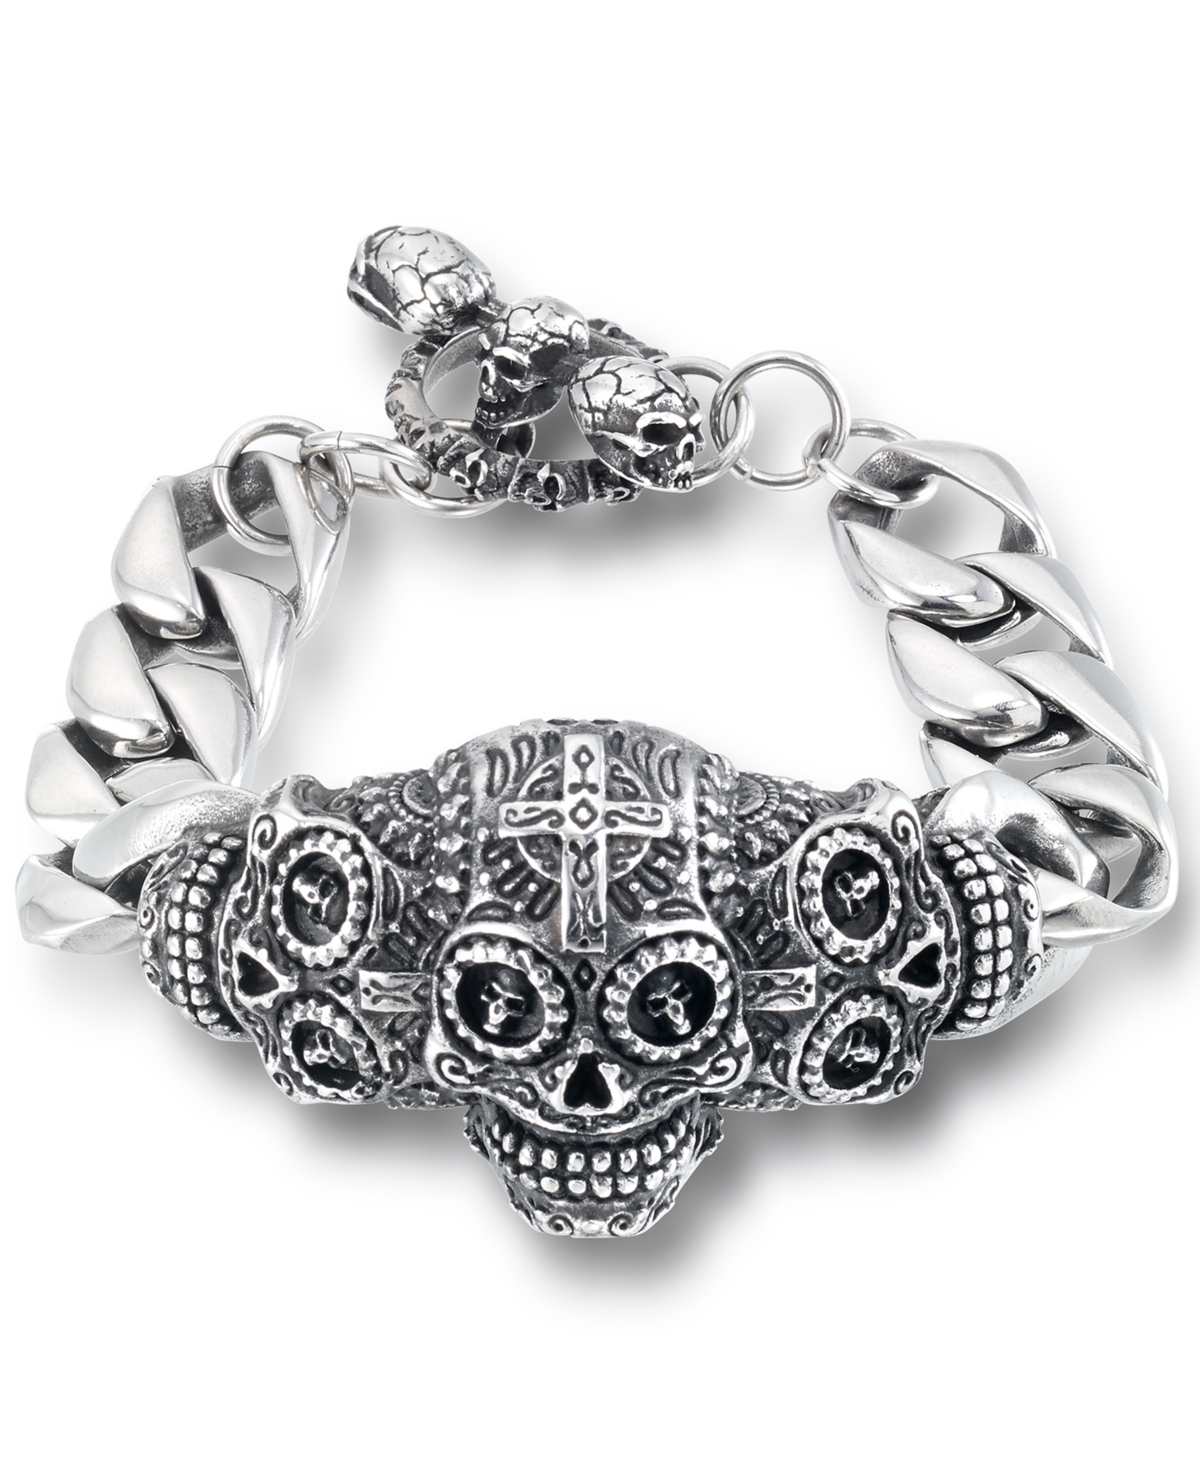 Andrew Charles by Andy Hilfiger Men's Ornamental Skull Curb Link Bracelet in Stainless Steel